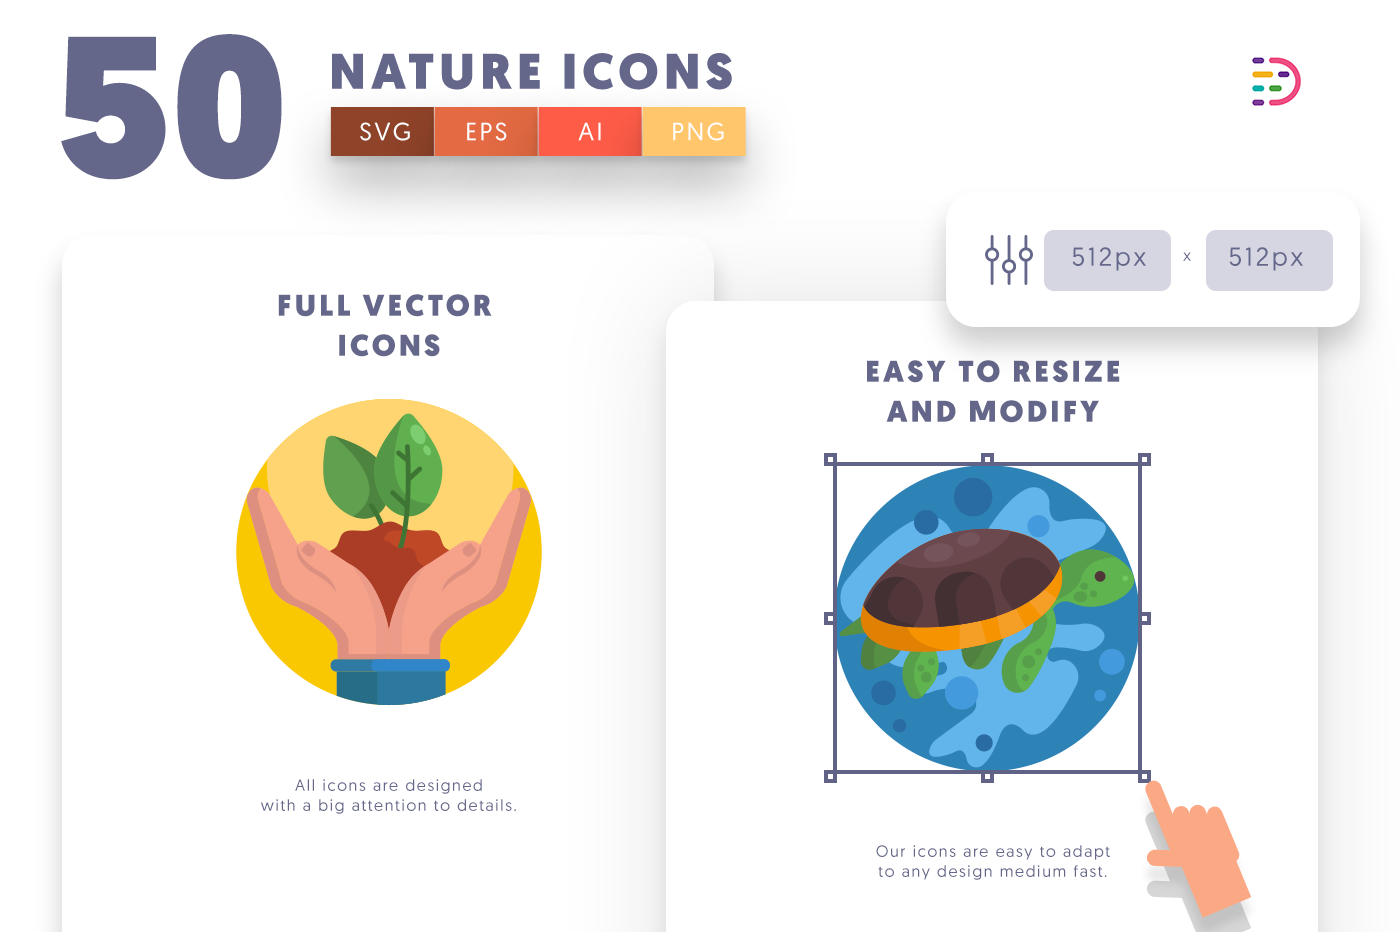 Full vector Nature Icons